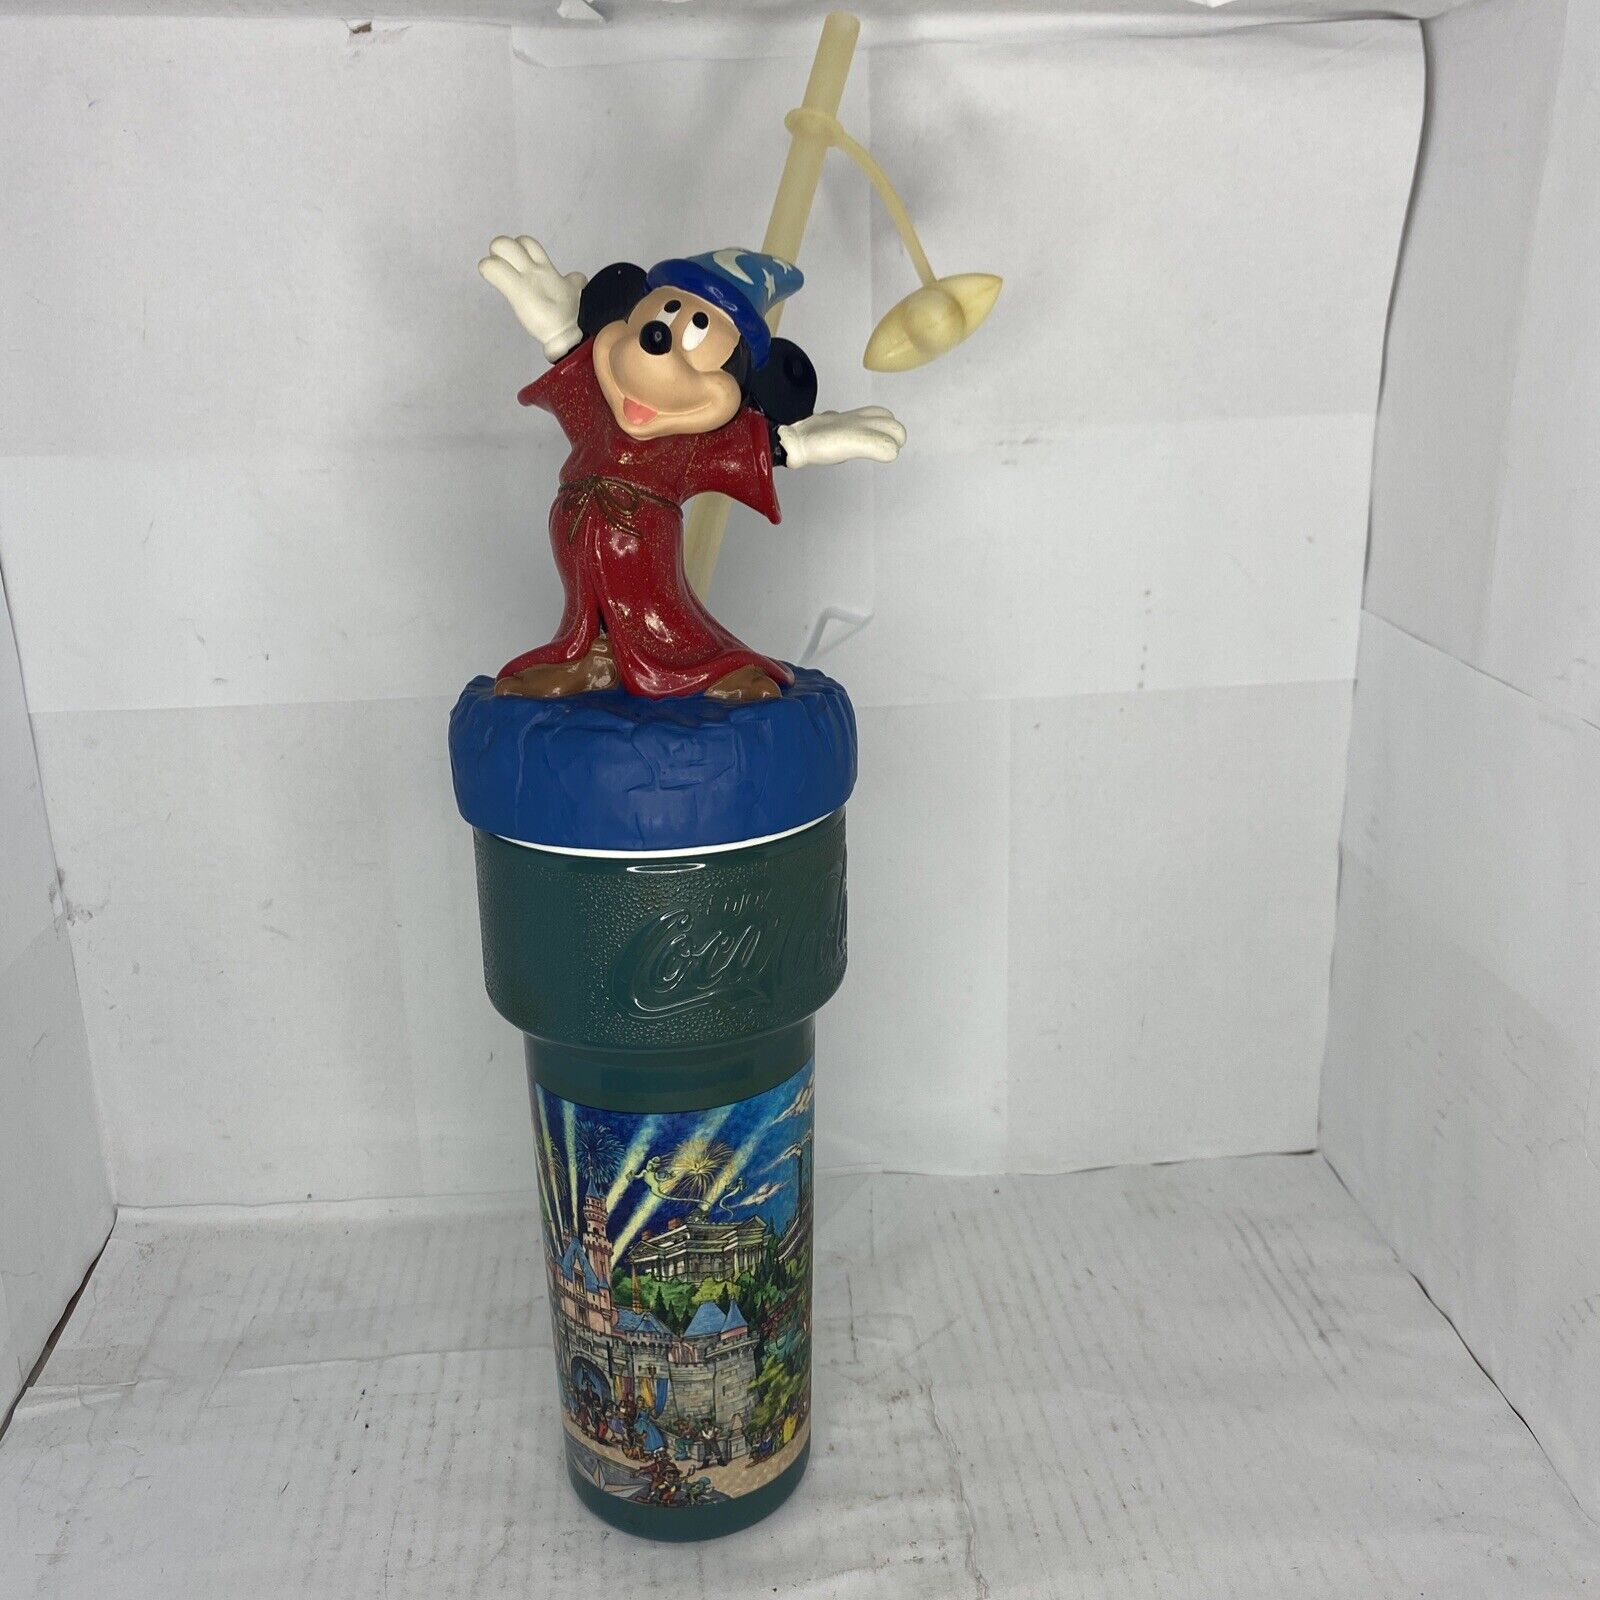 Rare Vintage Disneyland Sipper Cup With Straw Tumbler Sourcerer Mickey